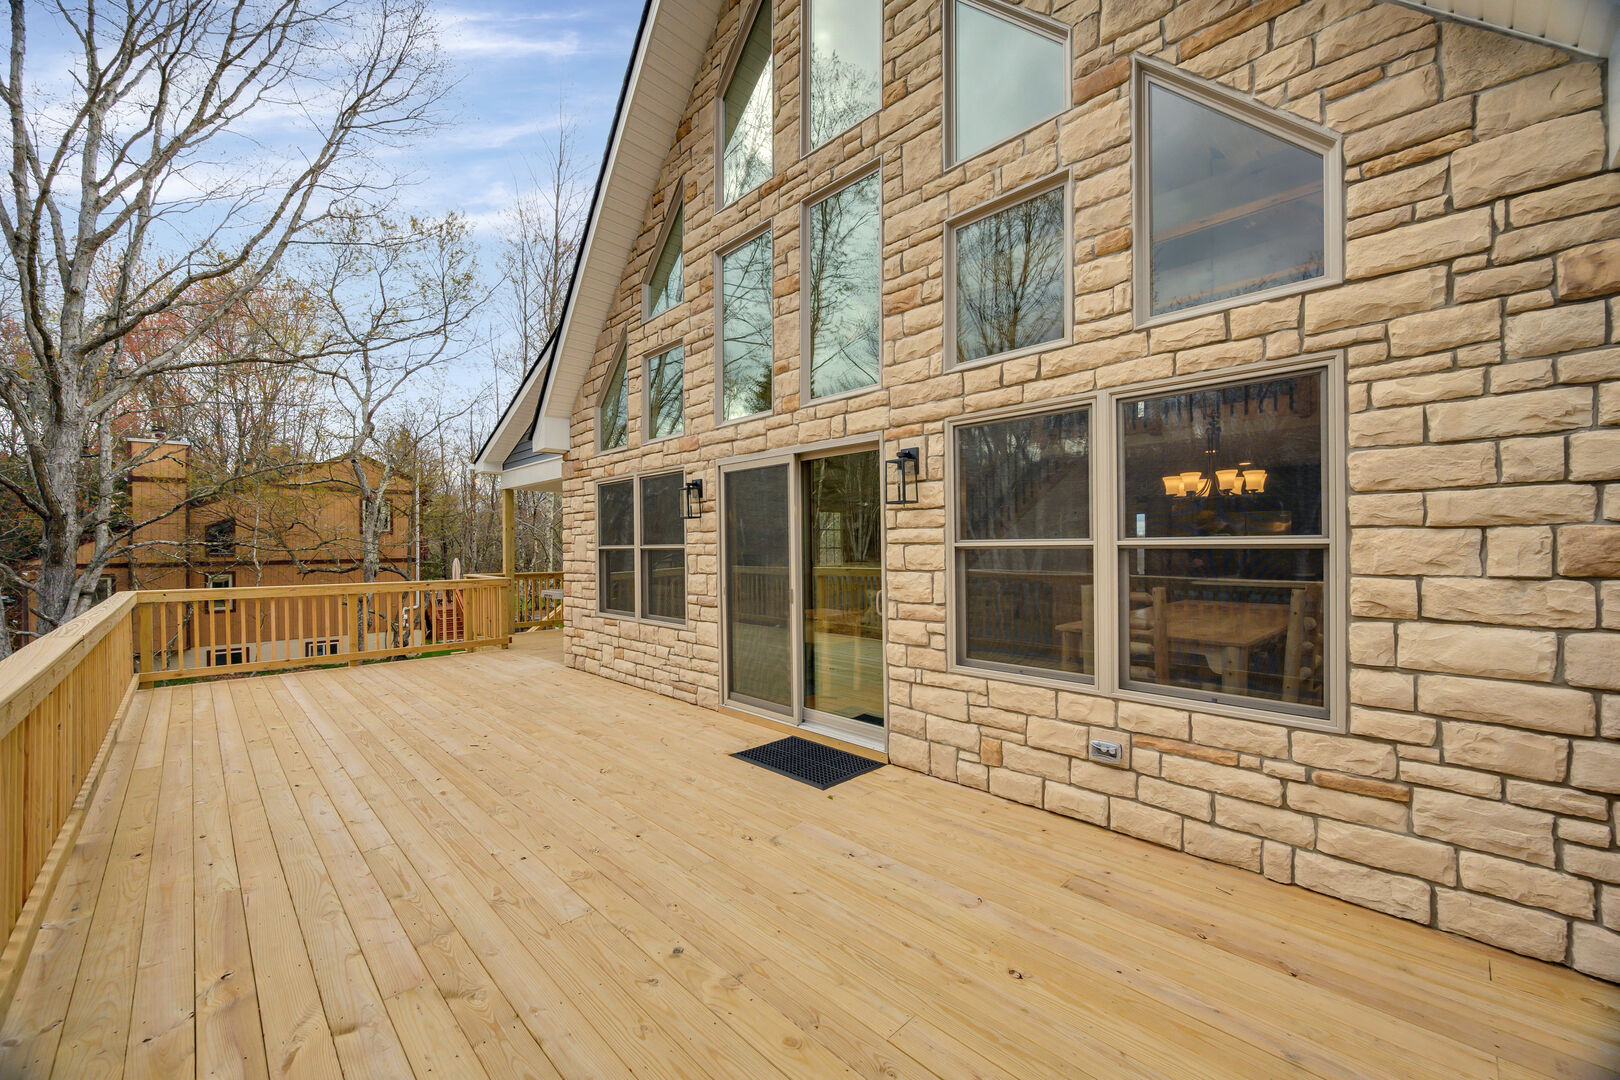 Take in the scenery from the spacious 2nd Floor Deck.